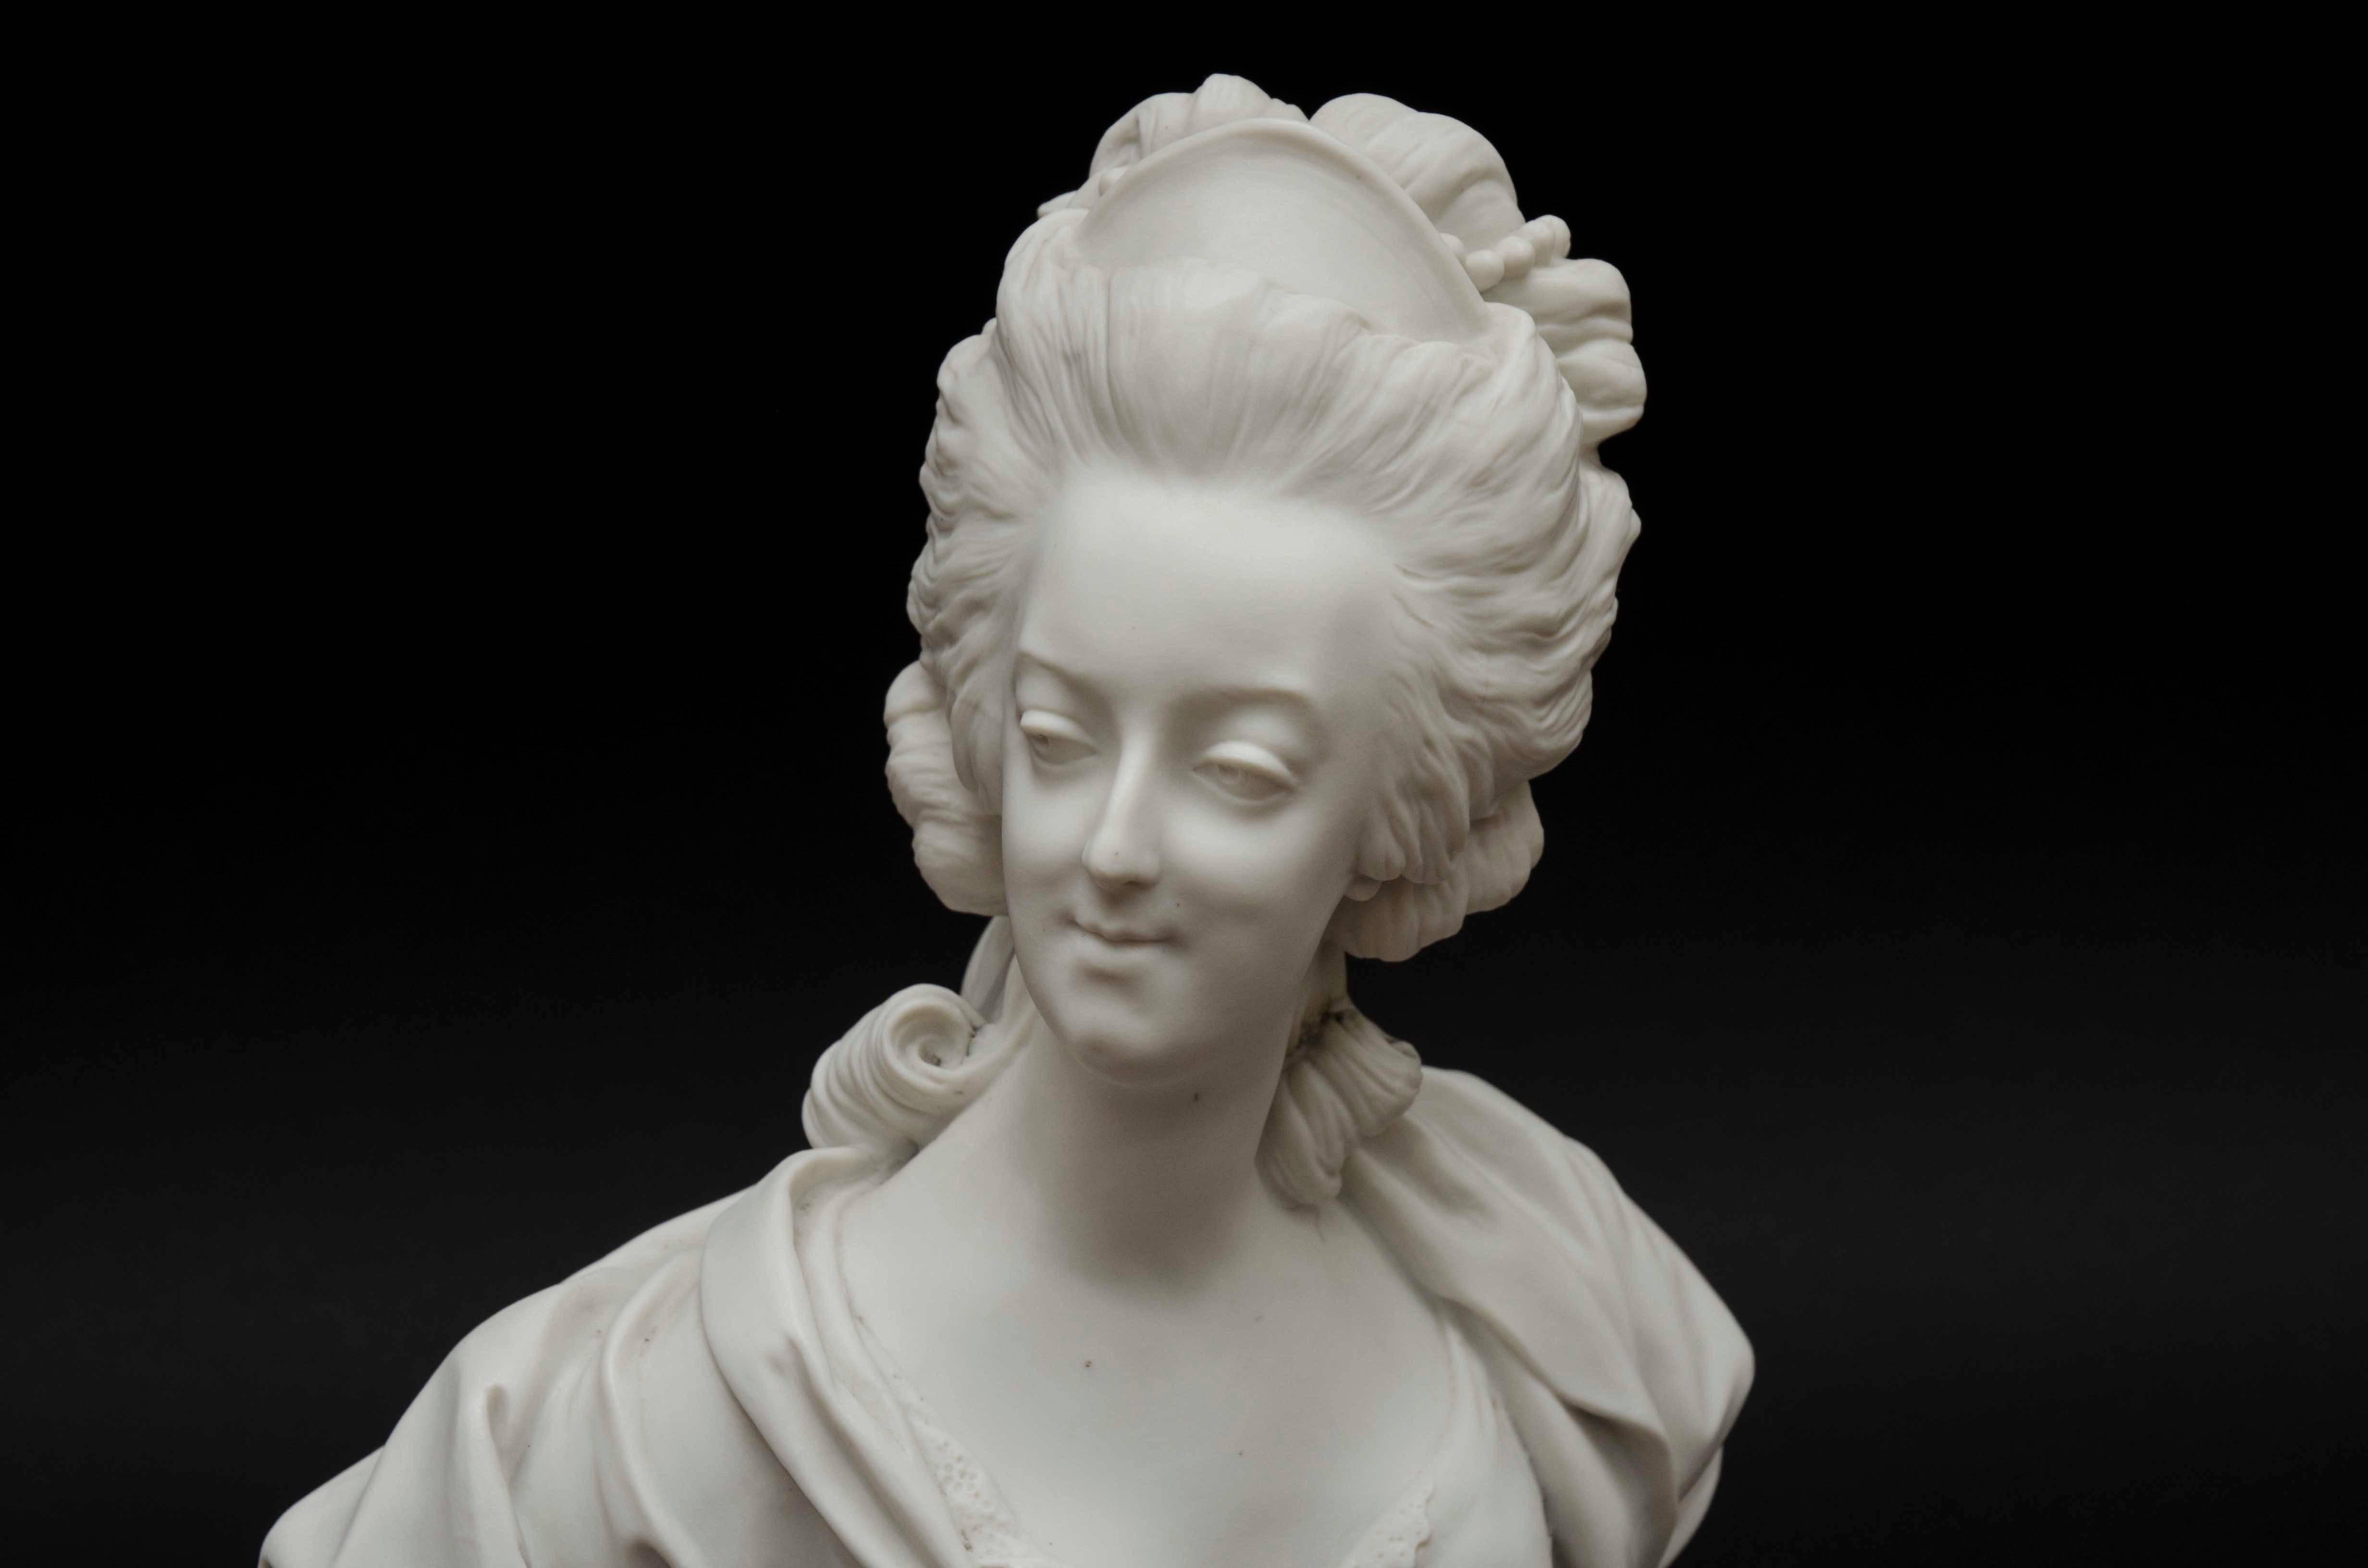 Small bisque bust of Marie-Antoinette, Queen of France, wife of Louis XVI. After the model of Sèvres by sculpteur Louis-Simon Boizot (1785). Nice quality and details. Marked with the interlaced L's on the bottom.
Paris, late 19th century.
Size: H